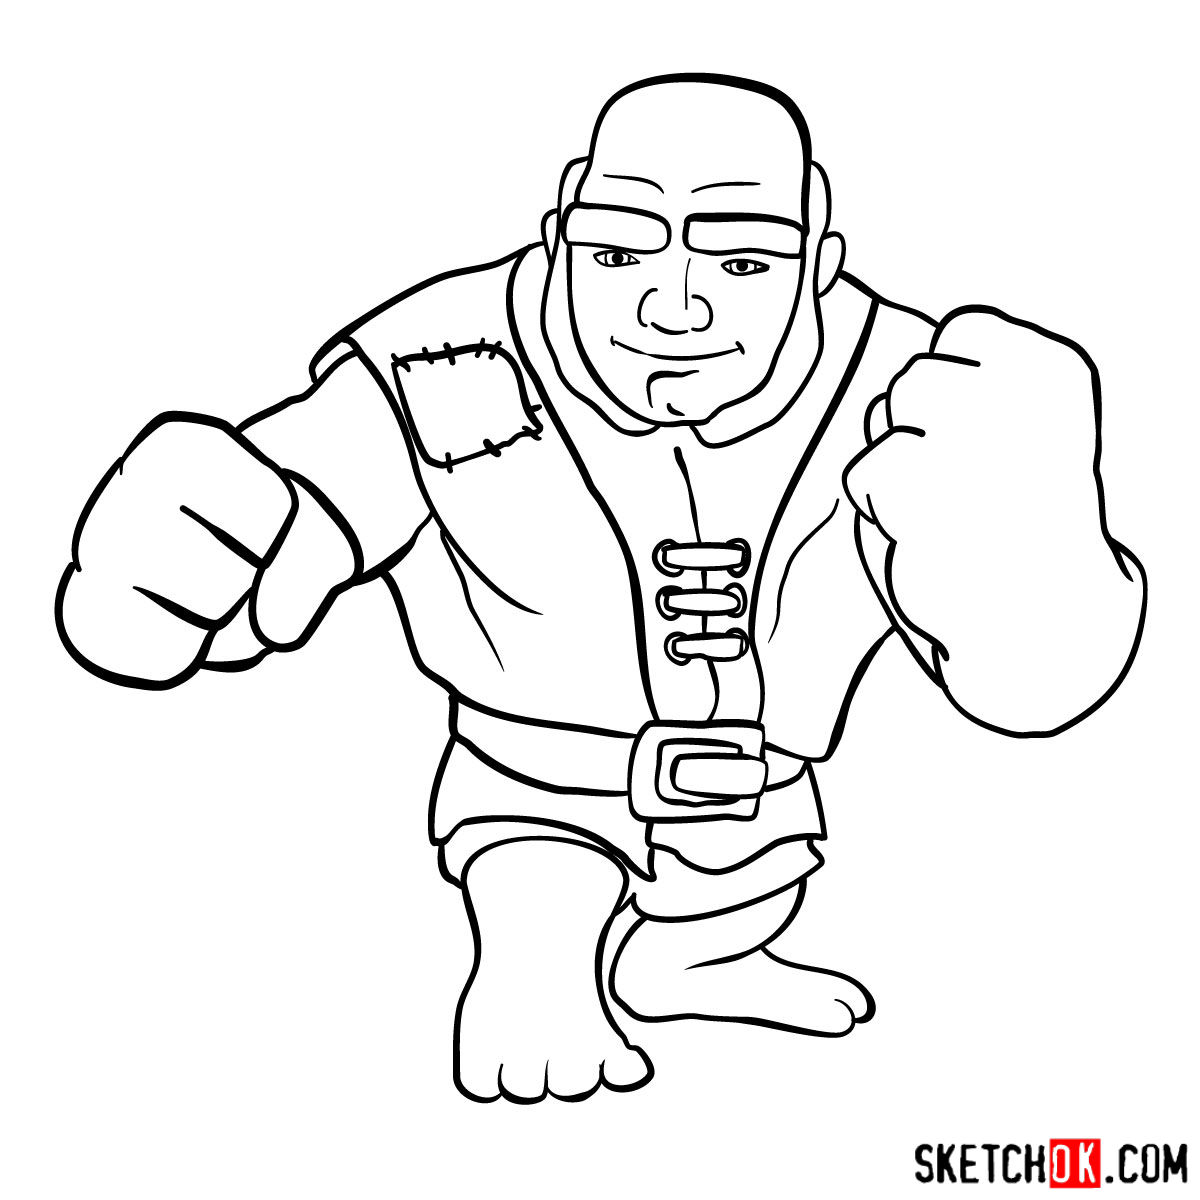 How to draw Giant from Clash of Clans - step 11